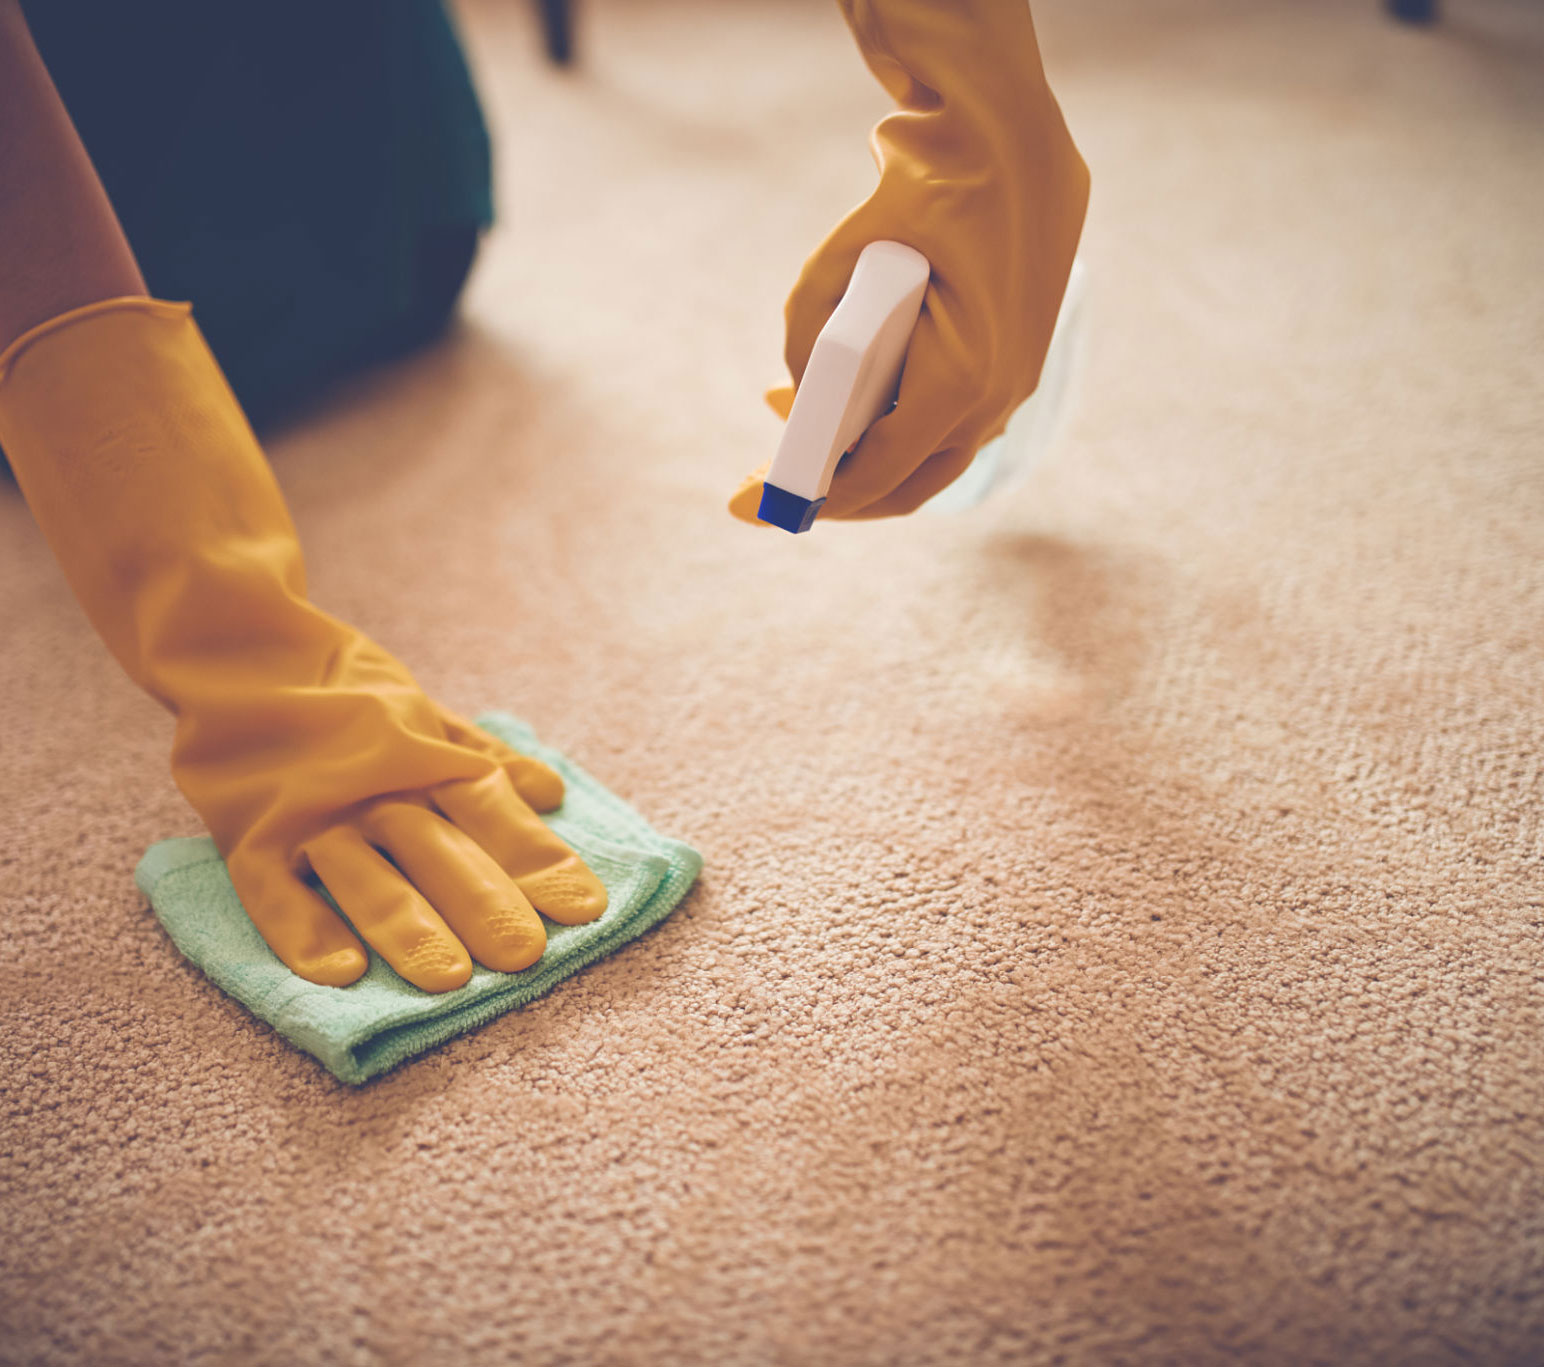 Cleaning Mold with Vinegar and Baking Soda